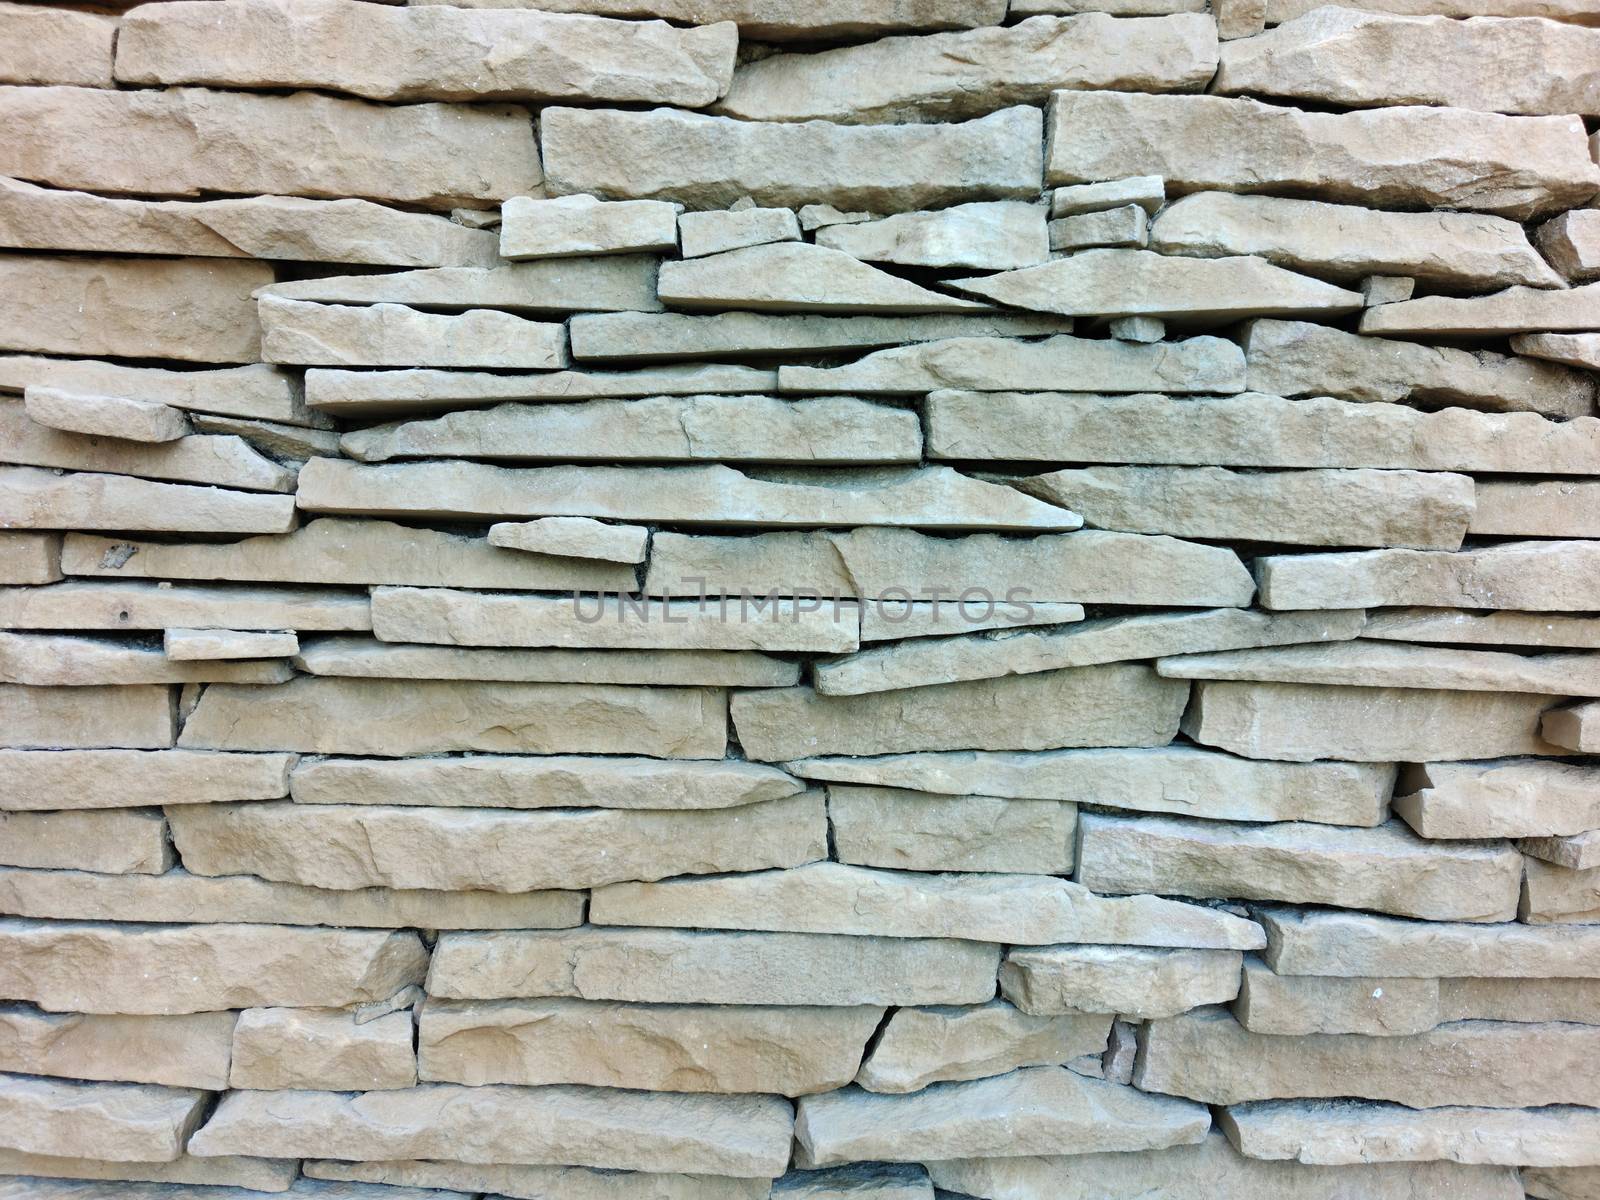 Gray modern brick wall for pattern and background